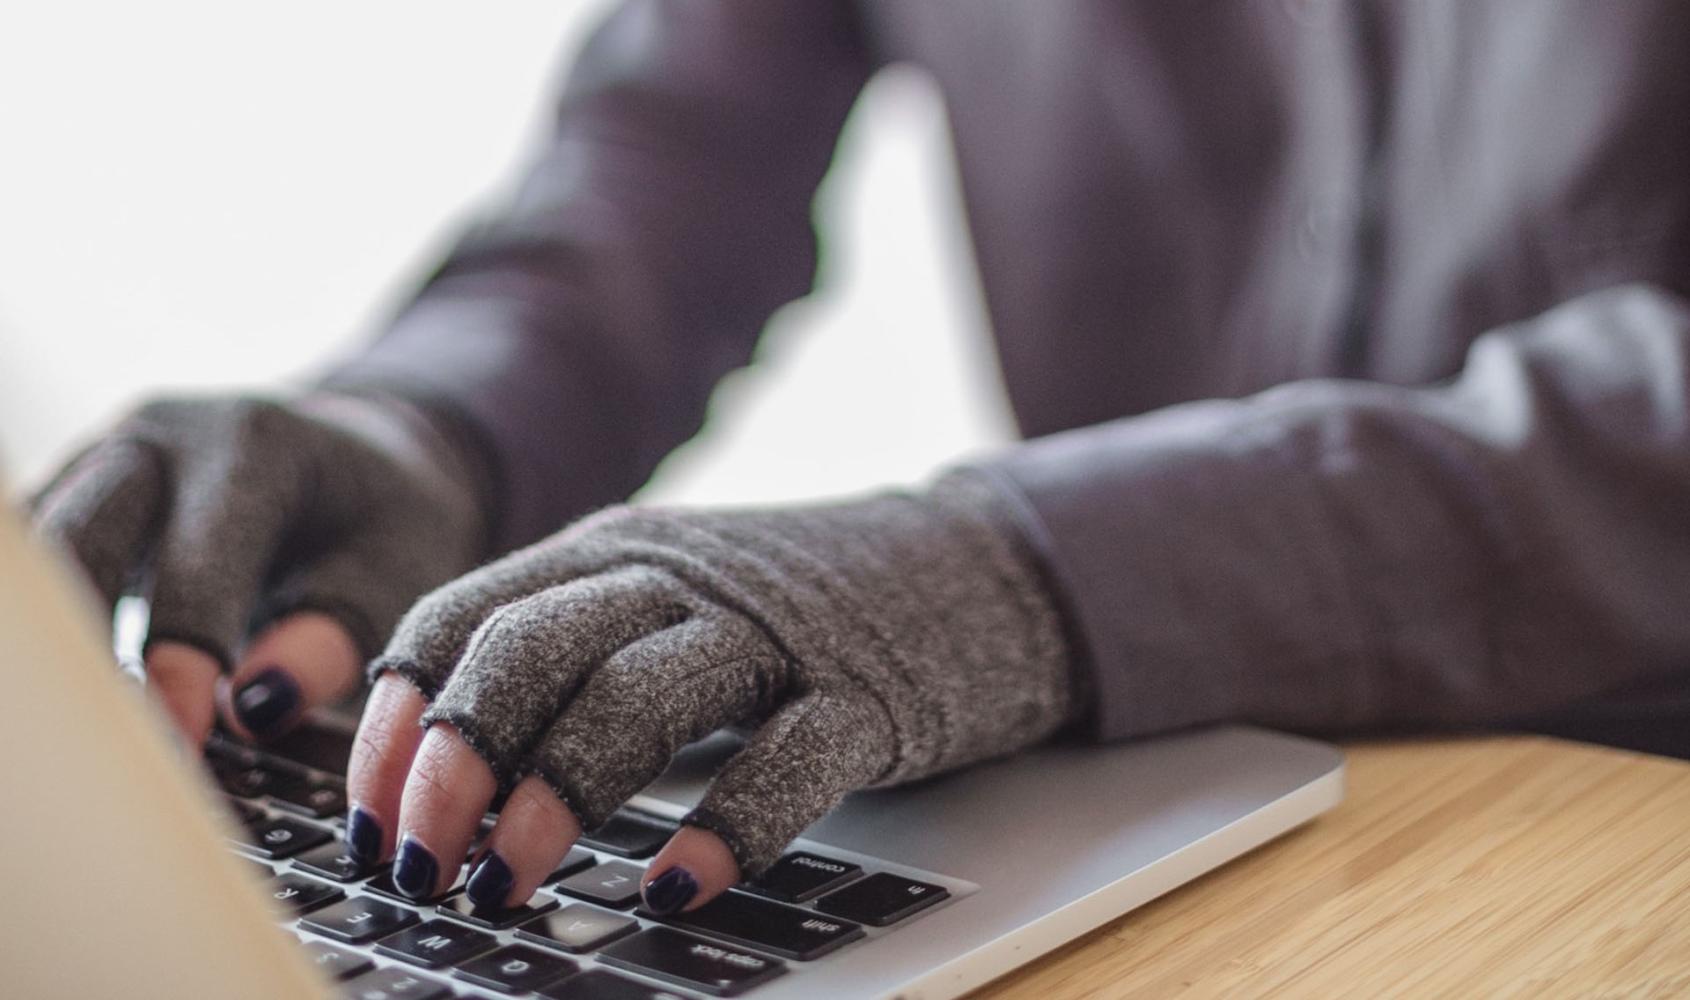 A person types on a laptop while wearing compression gloves. The hands and keyboard are the focal point. Image courtesy of Disabled and Here.